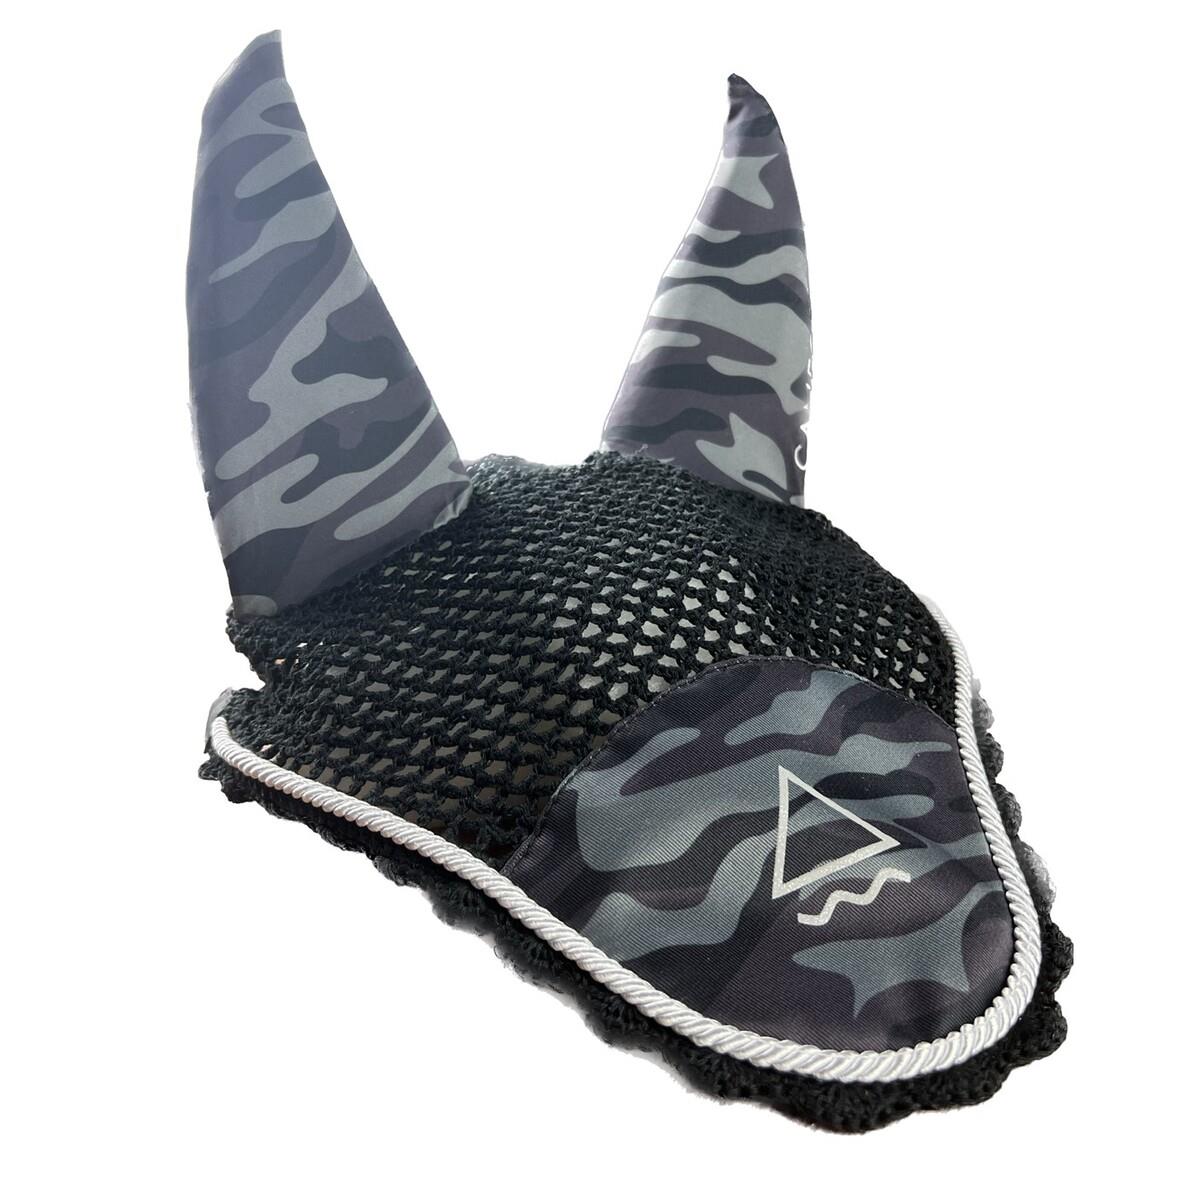 Cameo Equine Zest High Performance Ear Bonnet, 4-Way Stretch Fabric Crochet Body - Just Horse Riders